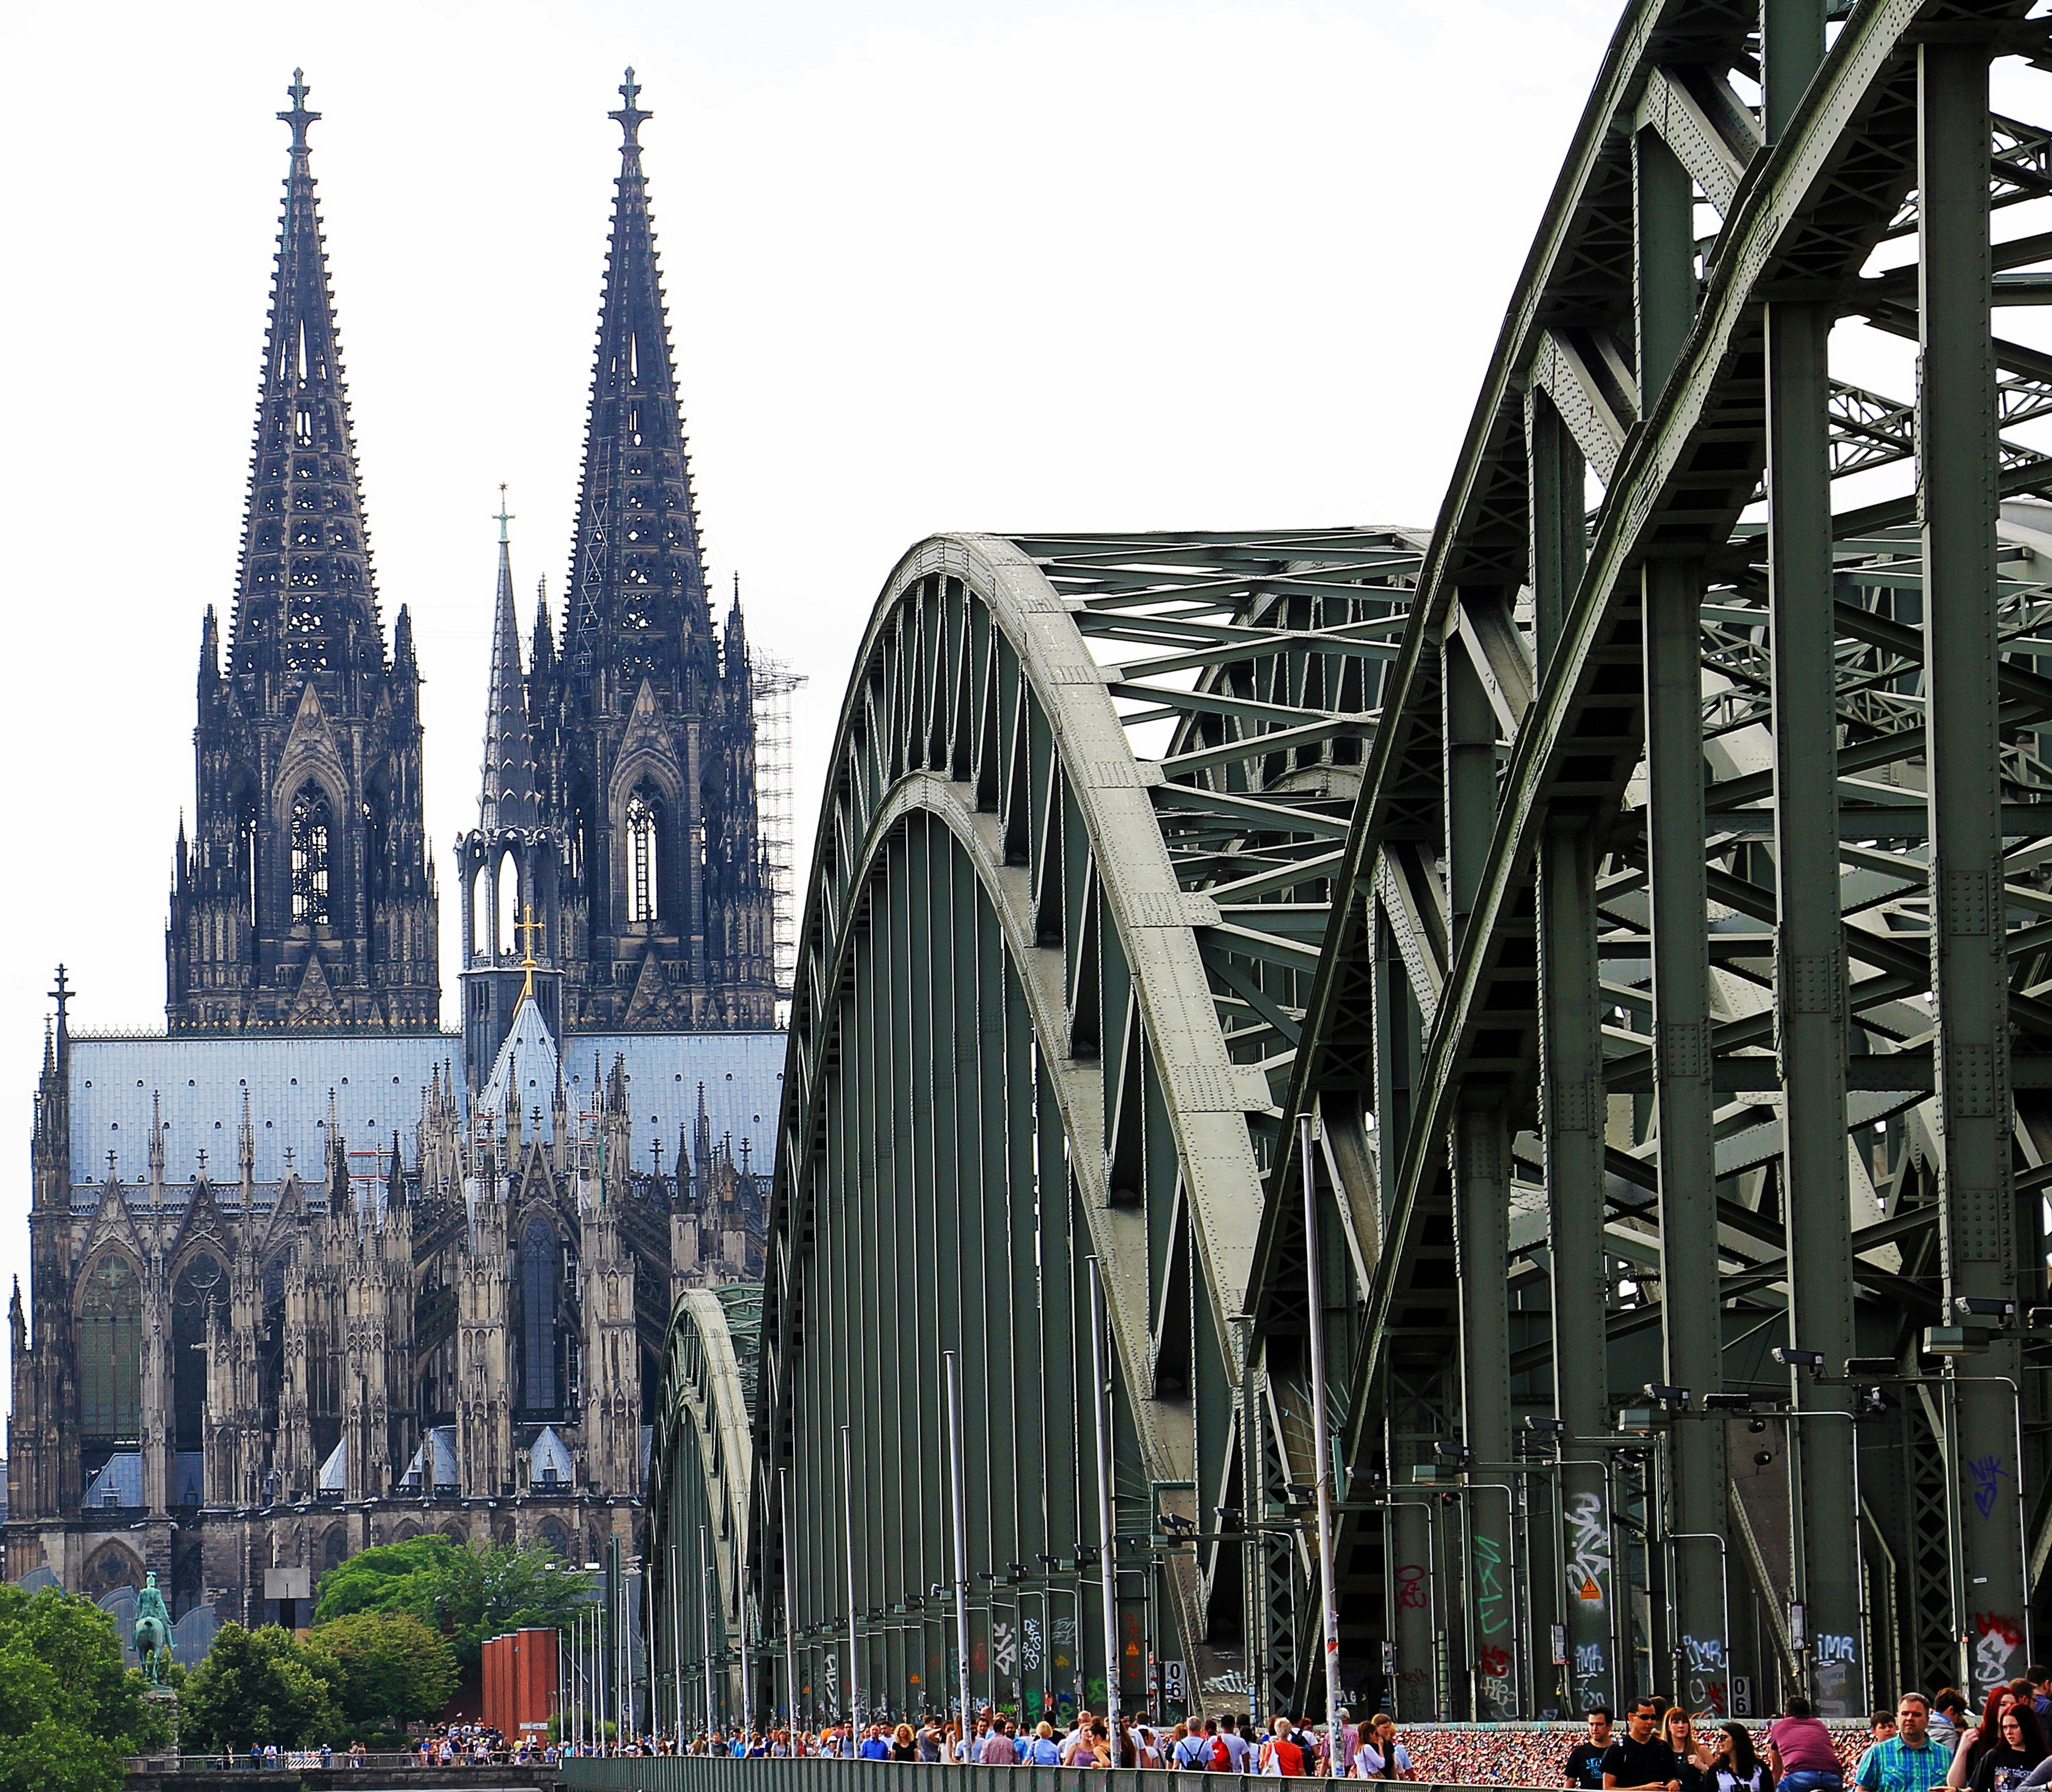 People walling on cologne bridge near cologne cathedral during daytime photo